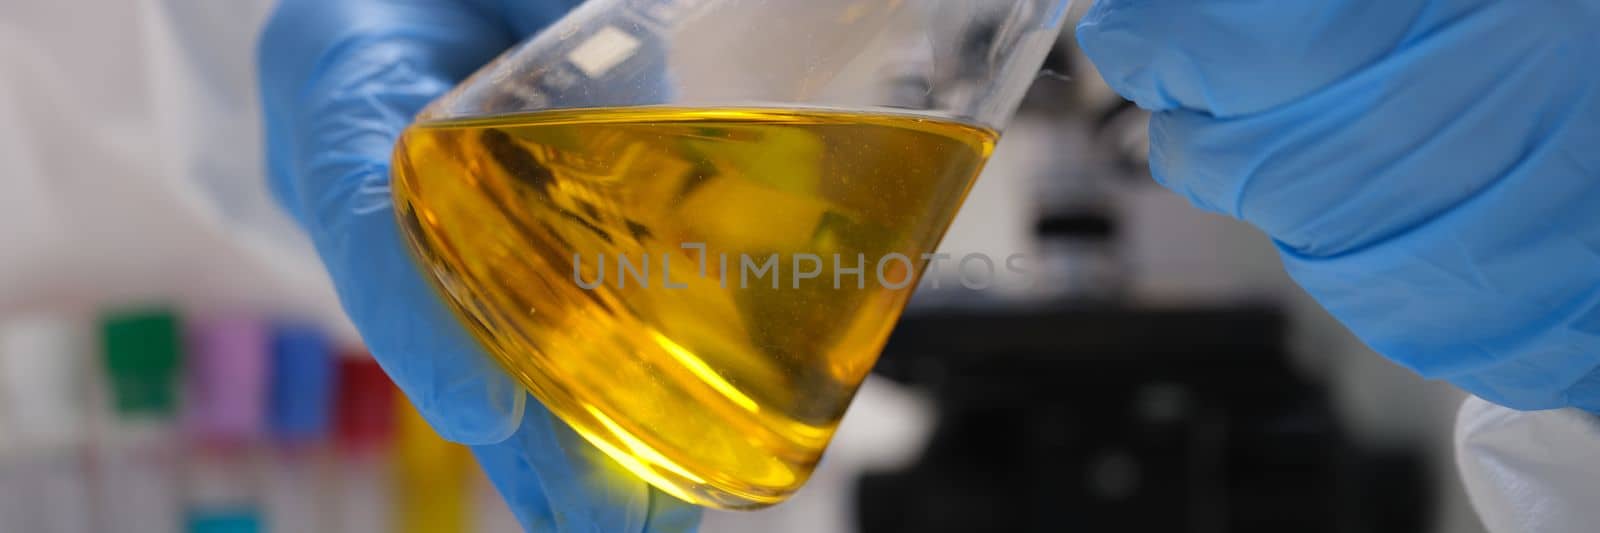 Chemist in gloves holds test tube with yellow oily liquid for research closeup. Laboratory research materials urine or oil toxic and poisonous concept